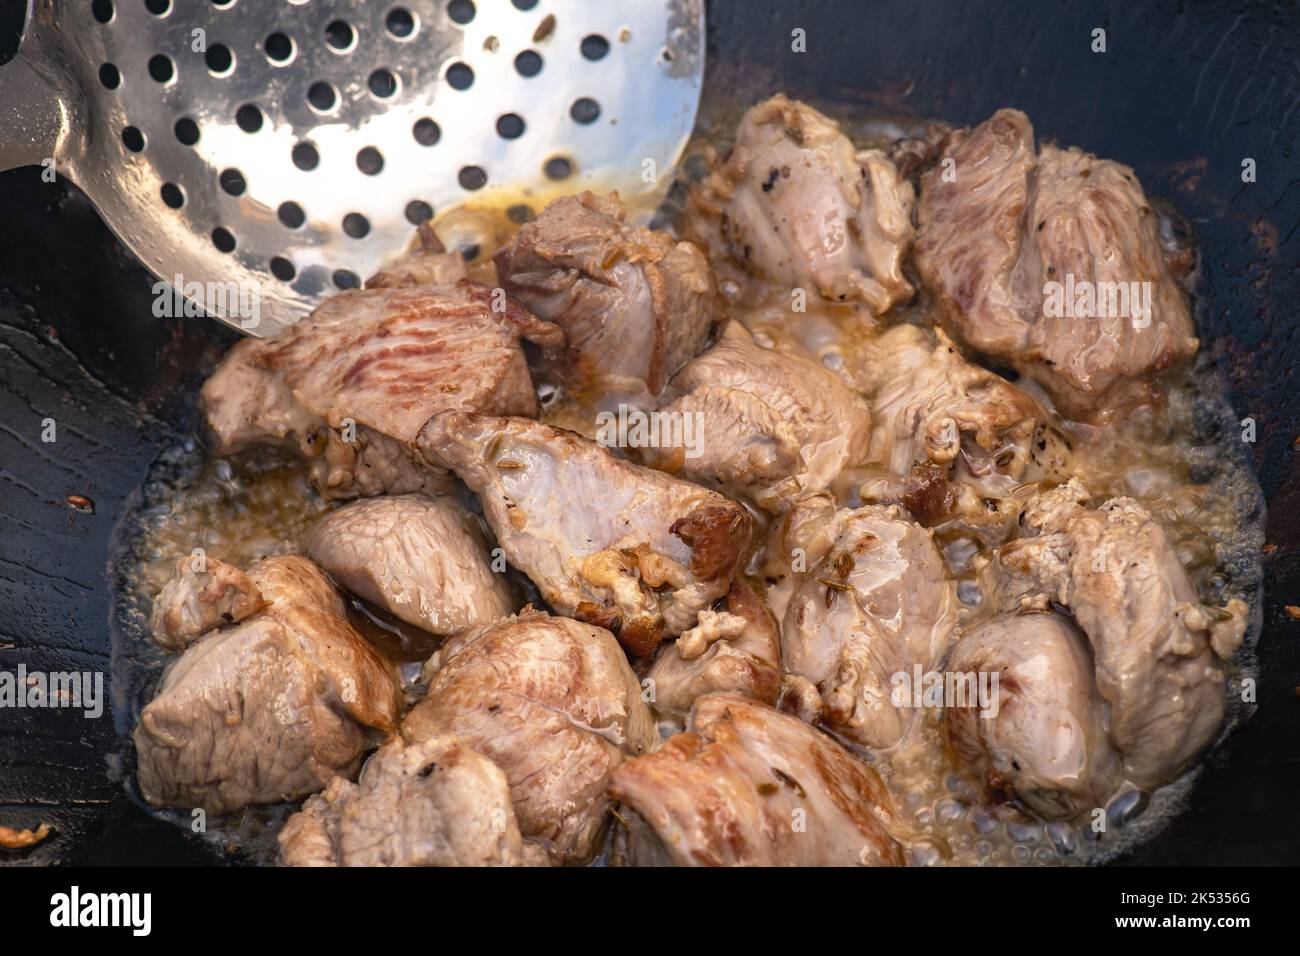 https://c8.alamy.com/comp/2K5356G/large-chunks-of-lamb-sheep-fried-in-oil-with-bubbles-in-a-black-cauldron-close-up-cooking-food-2K5356G.jpg